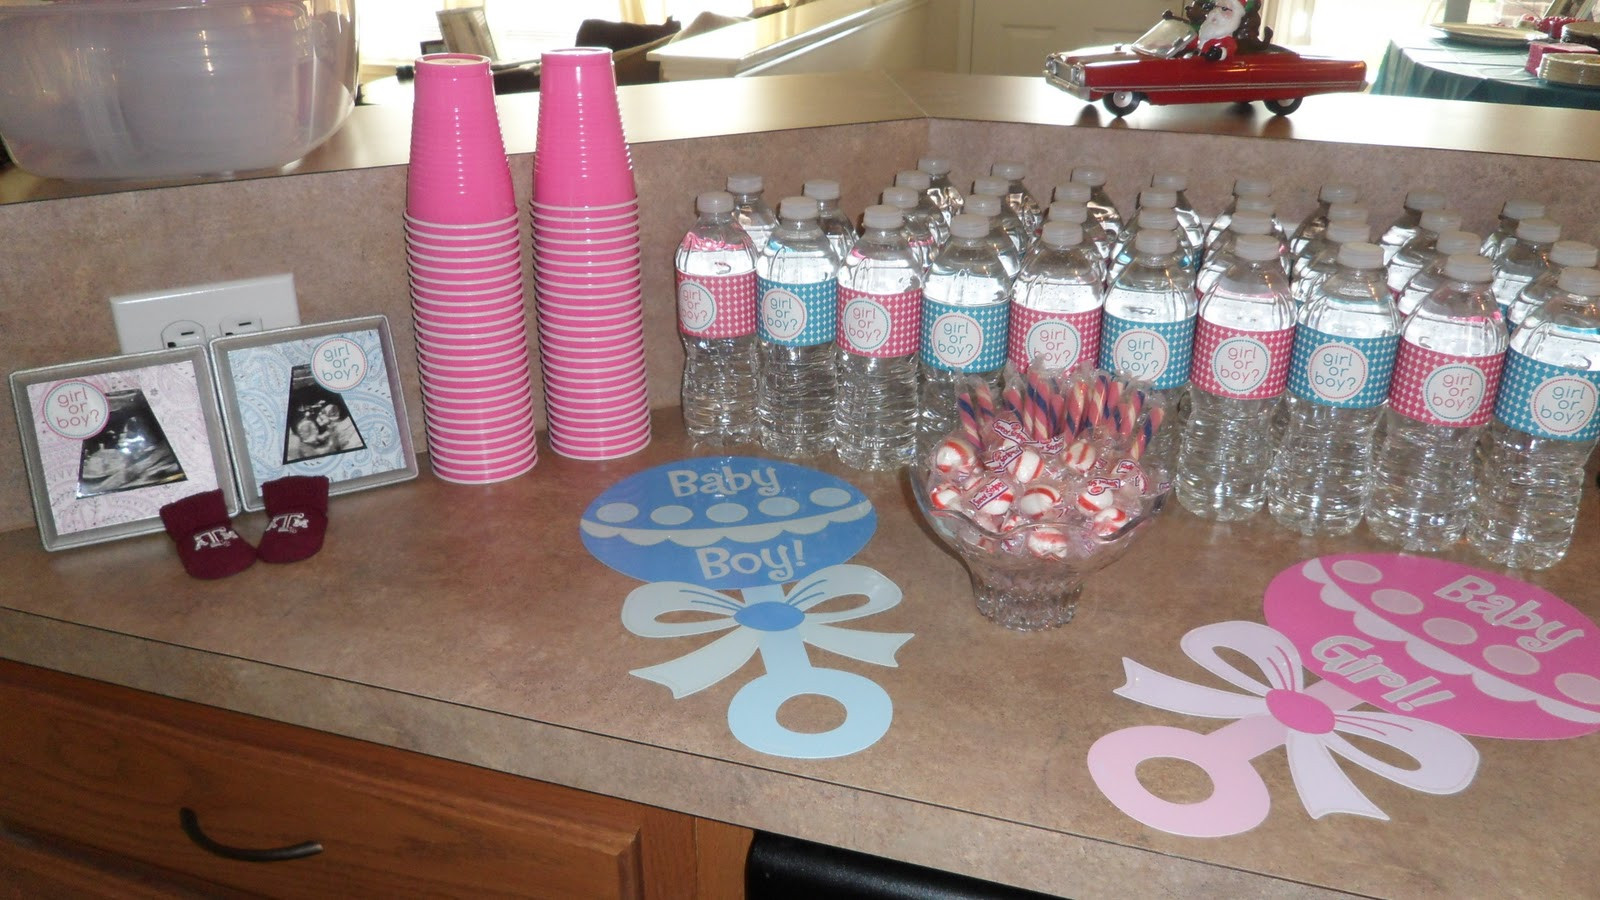 Baby Gender Party Ideas
 Gender Reveal Baby Shower on Pinterest